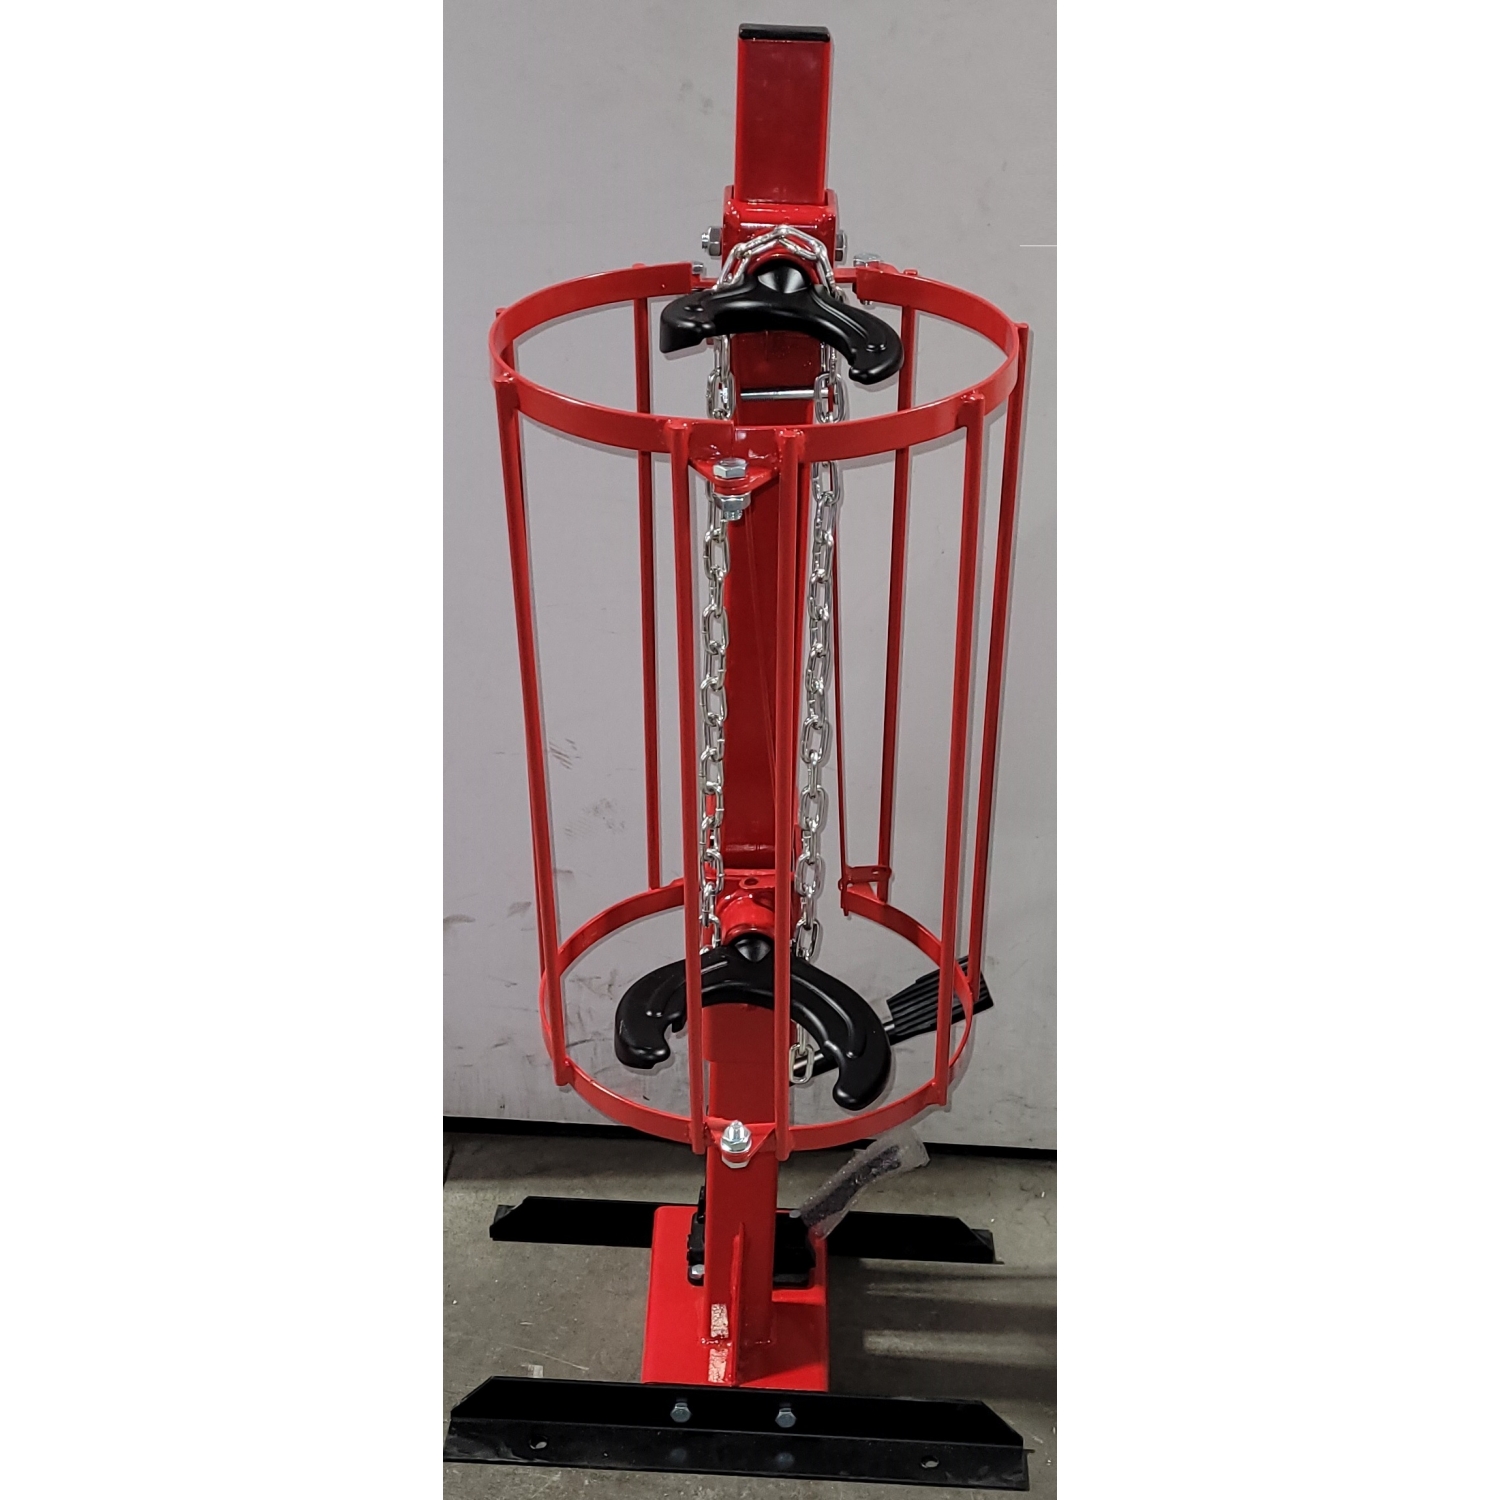 https://outilsquebec.com/11923-tm_thickbox_default/hydraulic-strut-spring-compressor-with-security-grill-cage.jpg